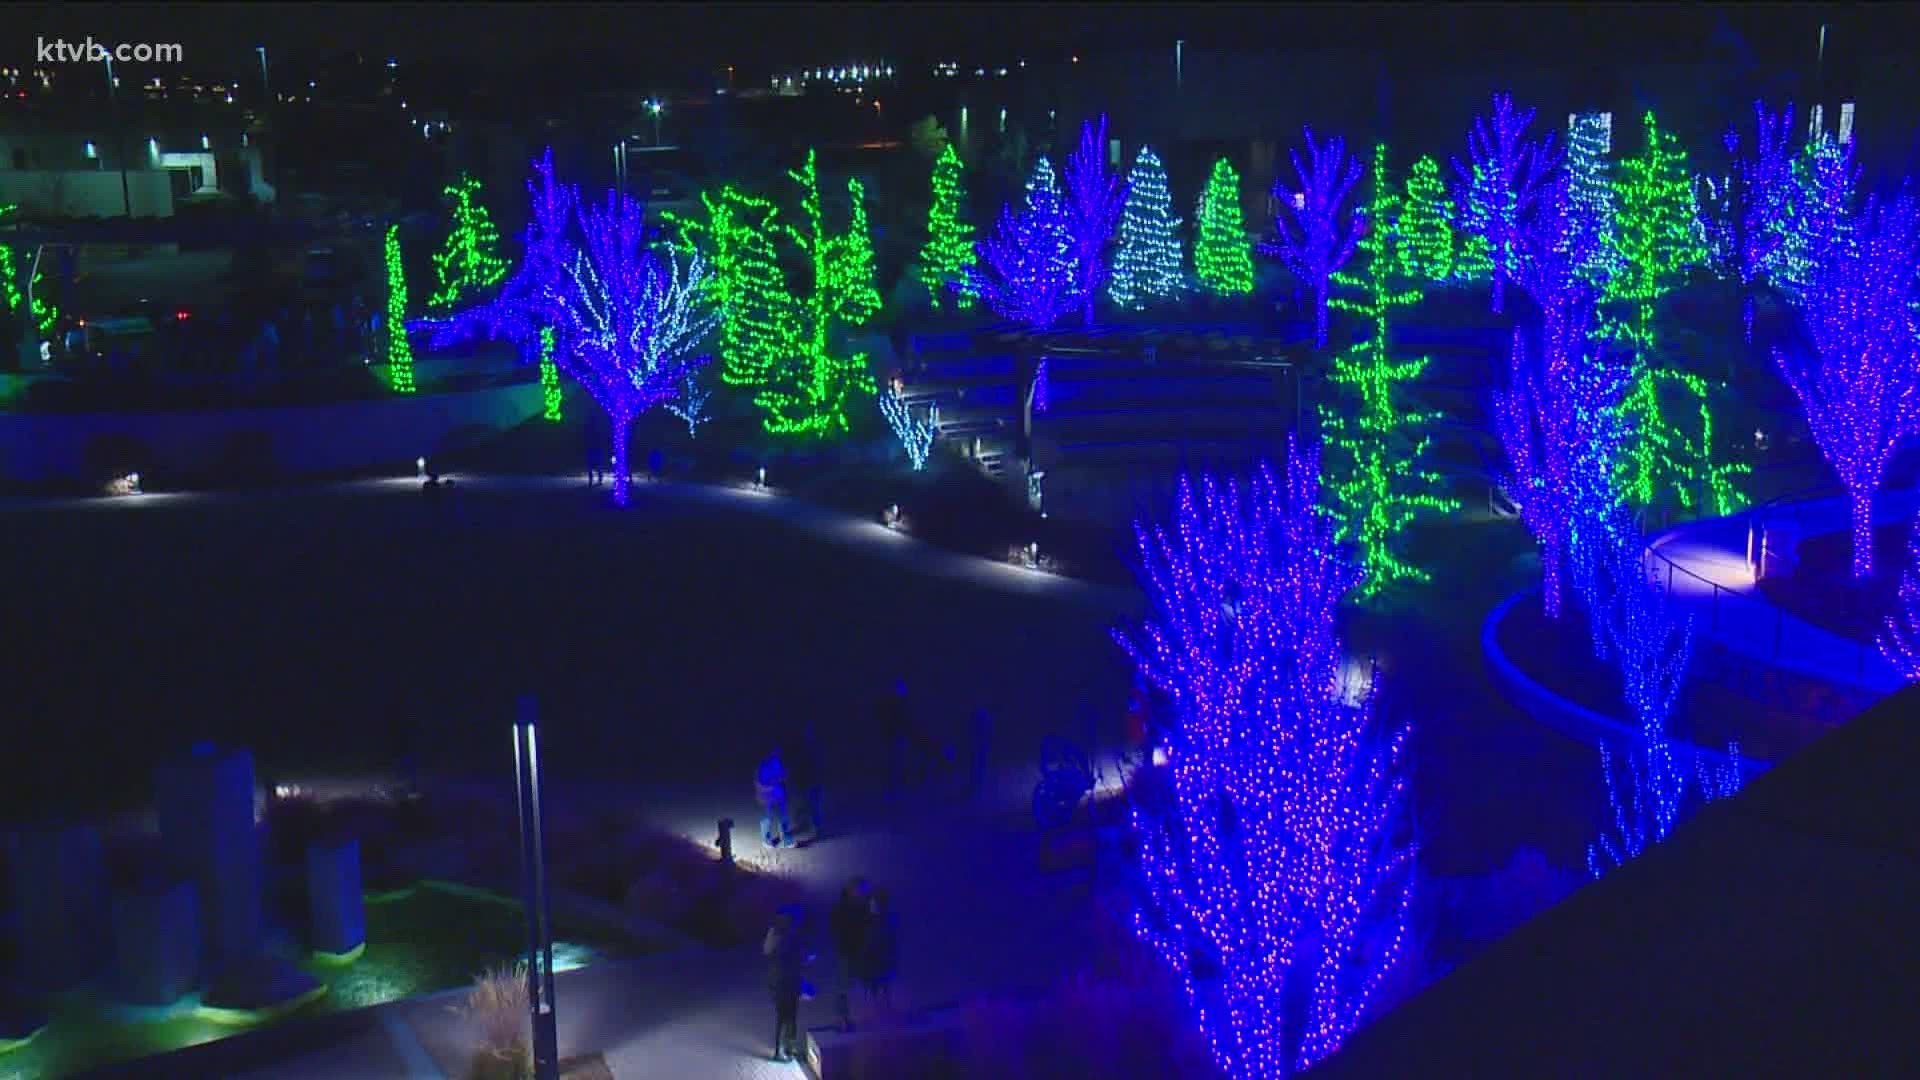 The light display covers more than 450 trees. It is open now and free to the public.